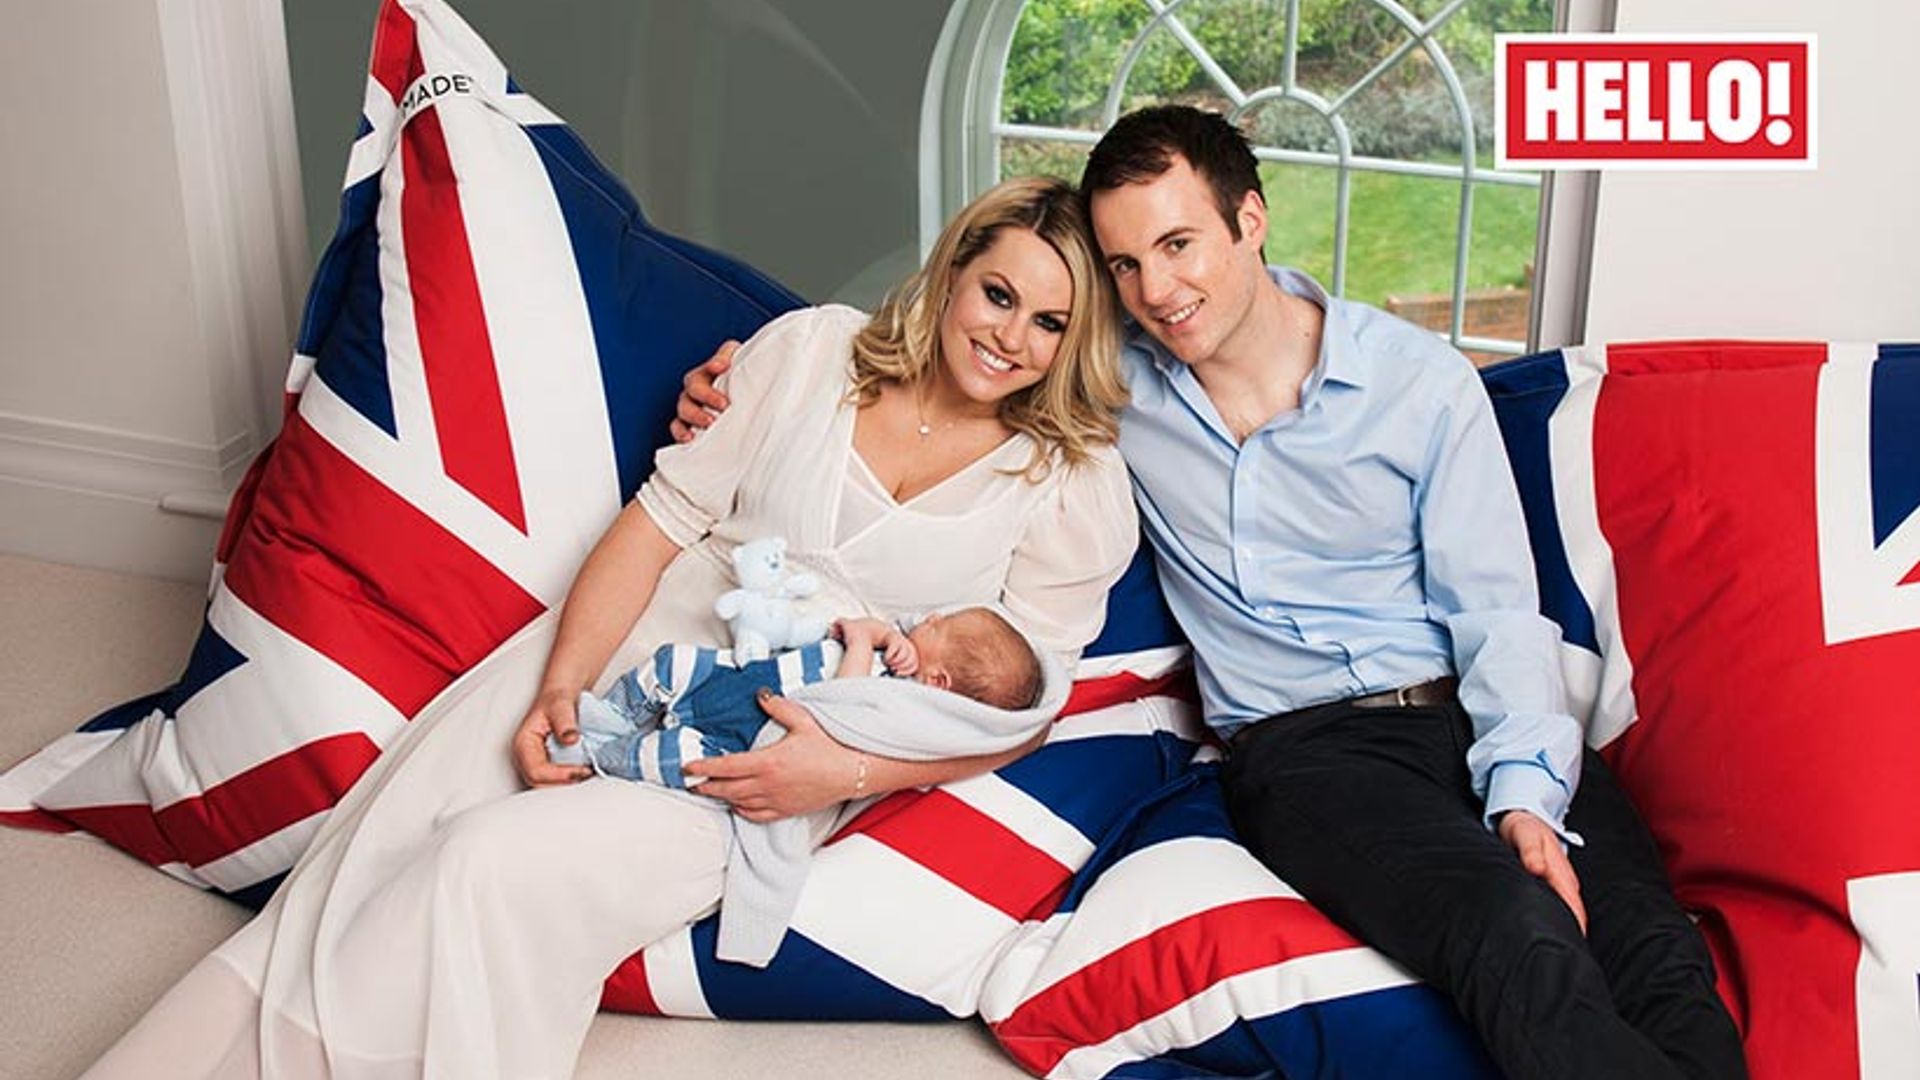 Exclusive! Chemmy Alcott introduces her baby son Locki